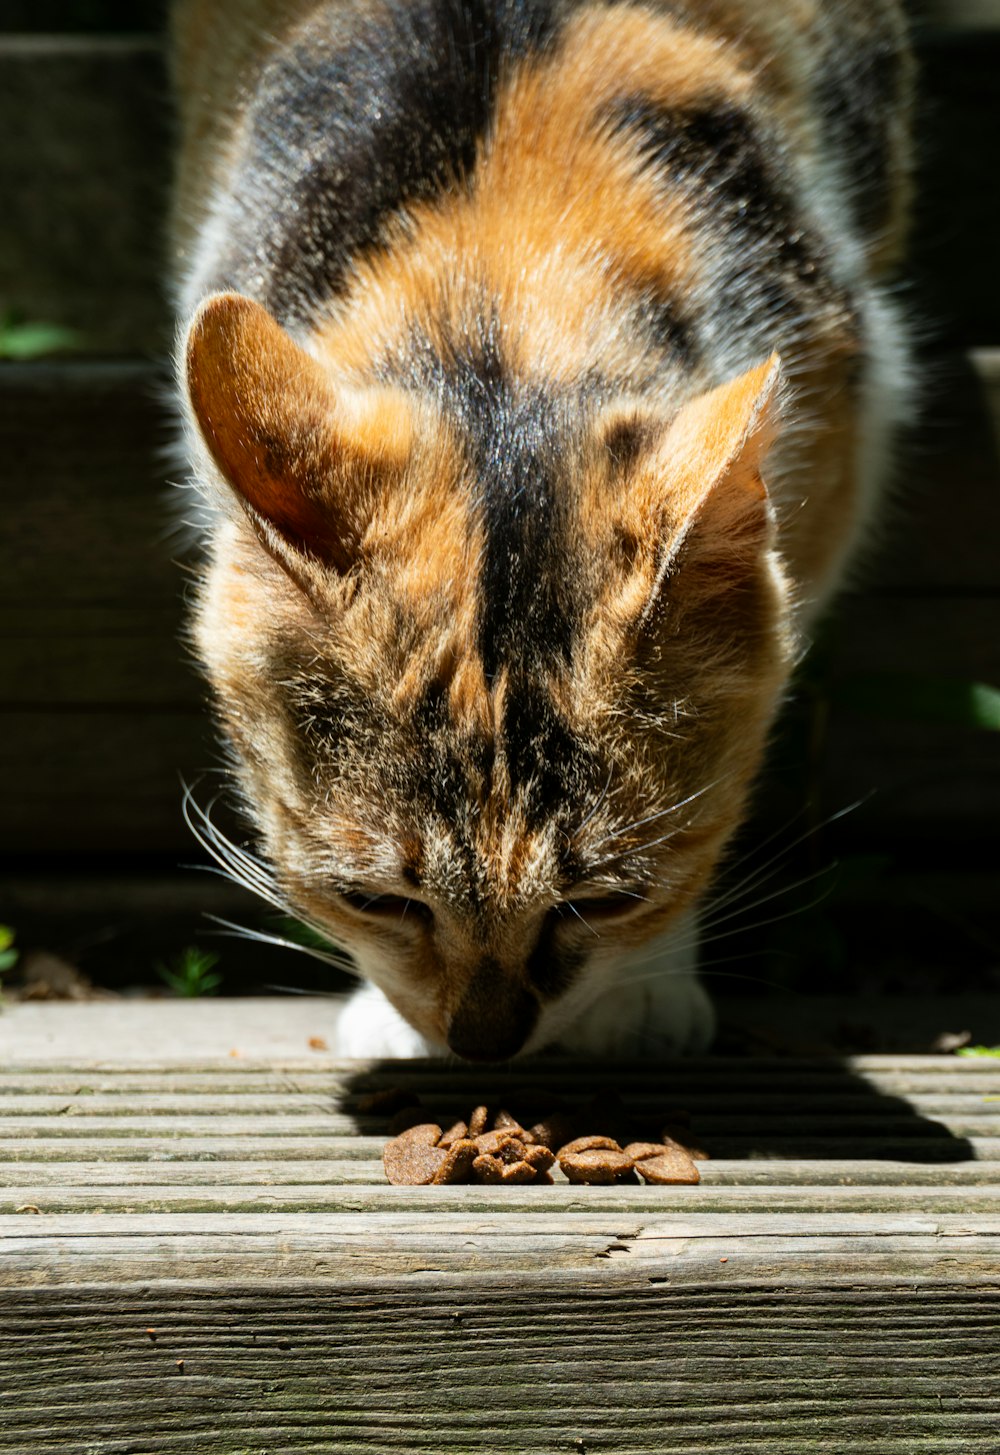 a calico cat eating food off of a wooden deck